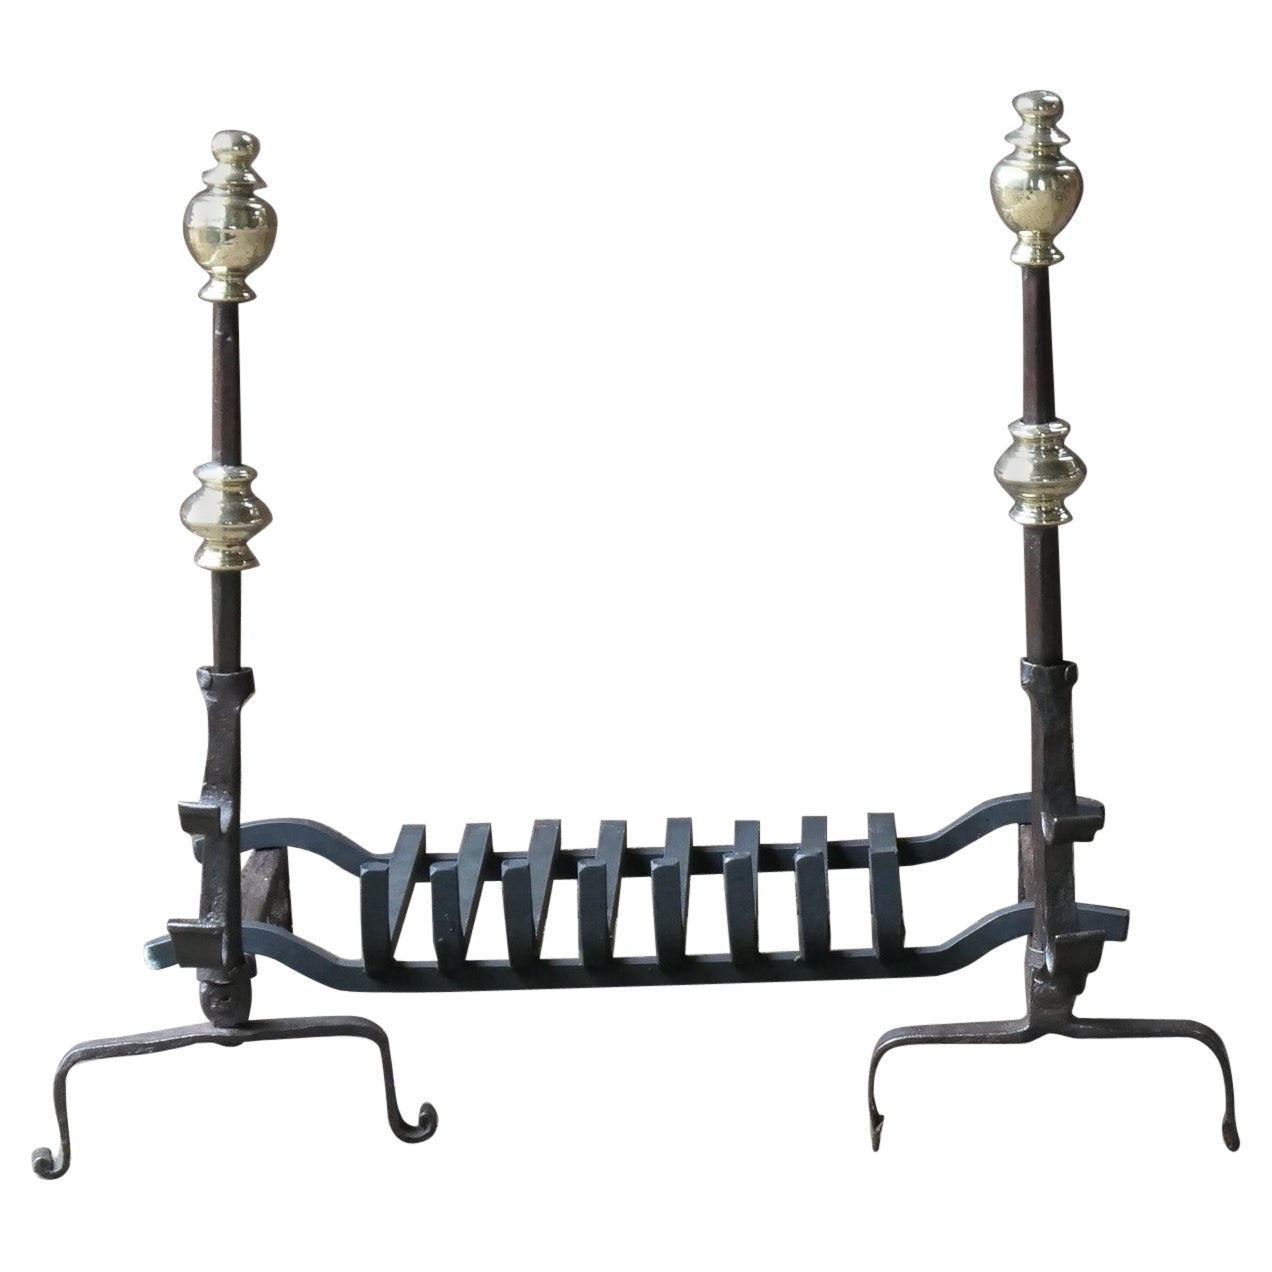 Antique French Louis XIV Period Fireplace Grate, 17th Century For Sale